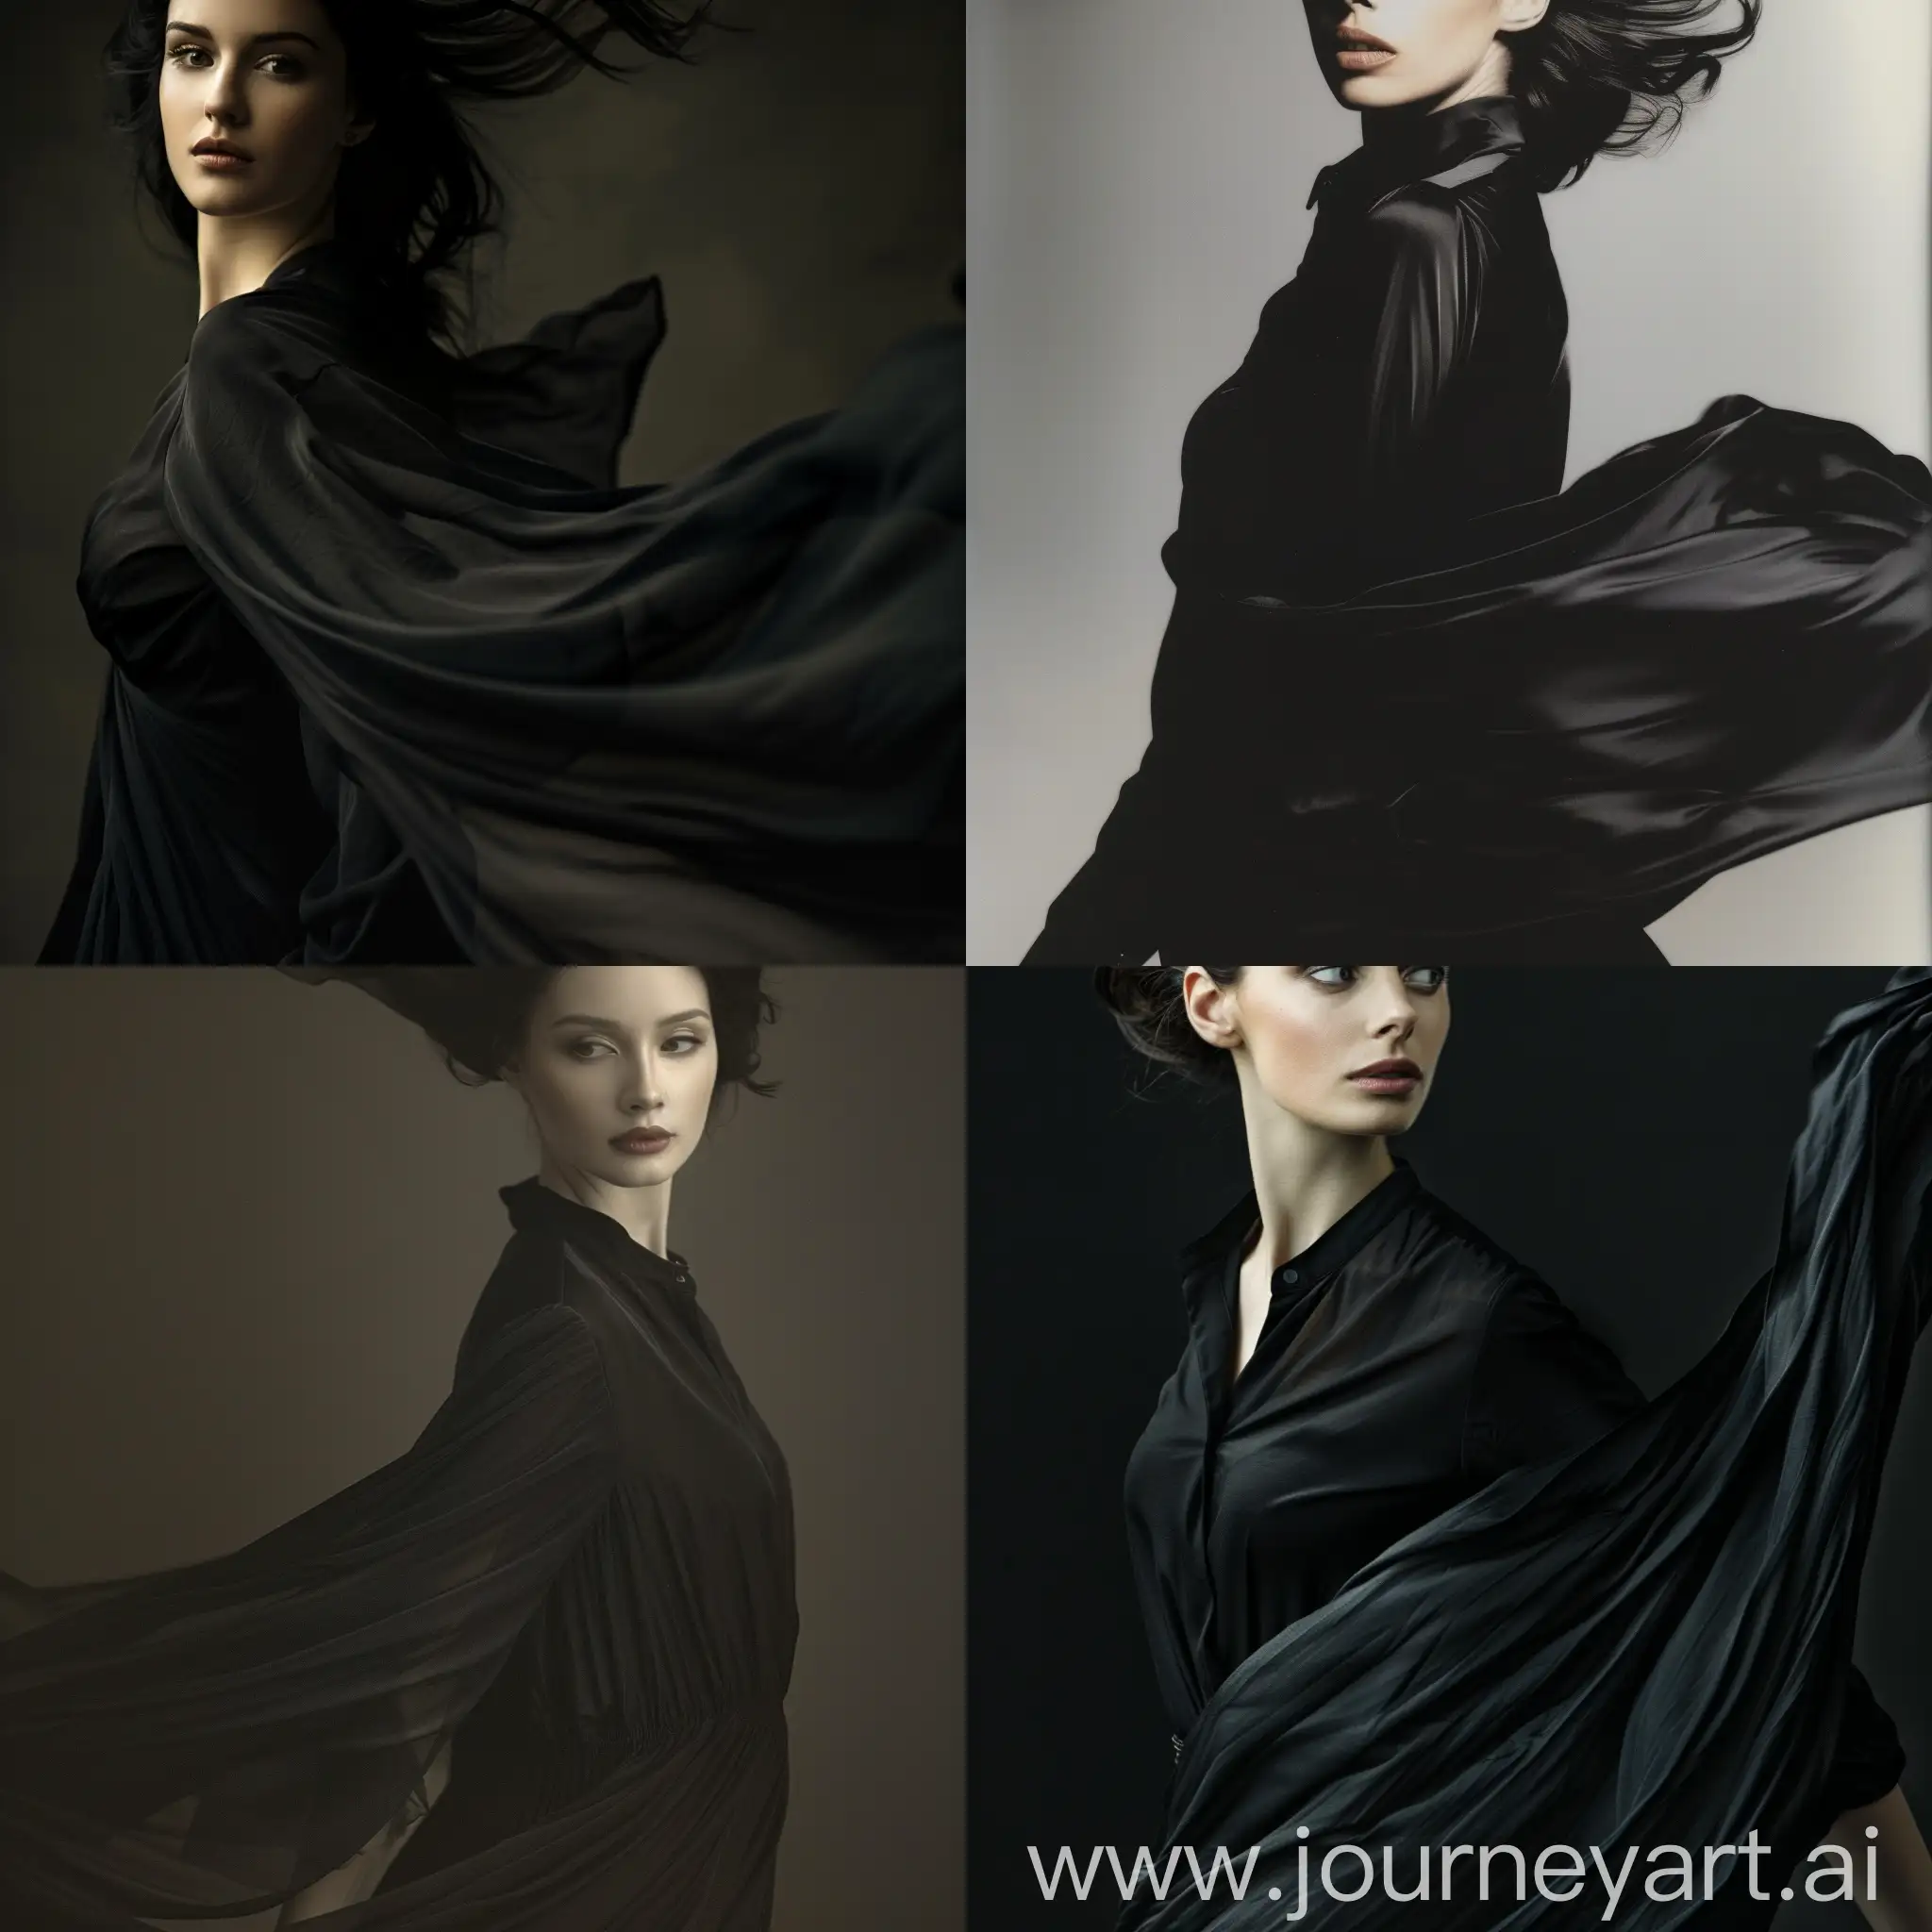 Elegant-Woman-in-Flowing-Black-Shirt-Captivating-Beauty-and-Mystery